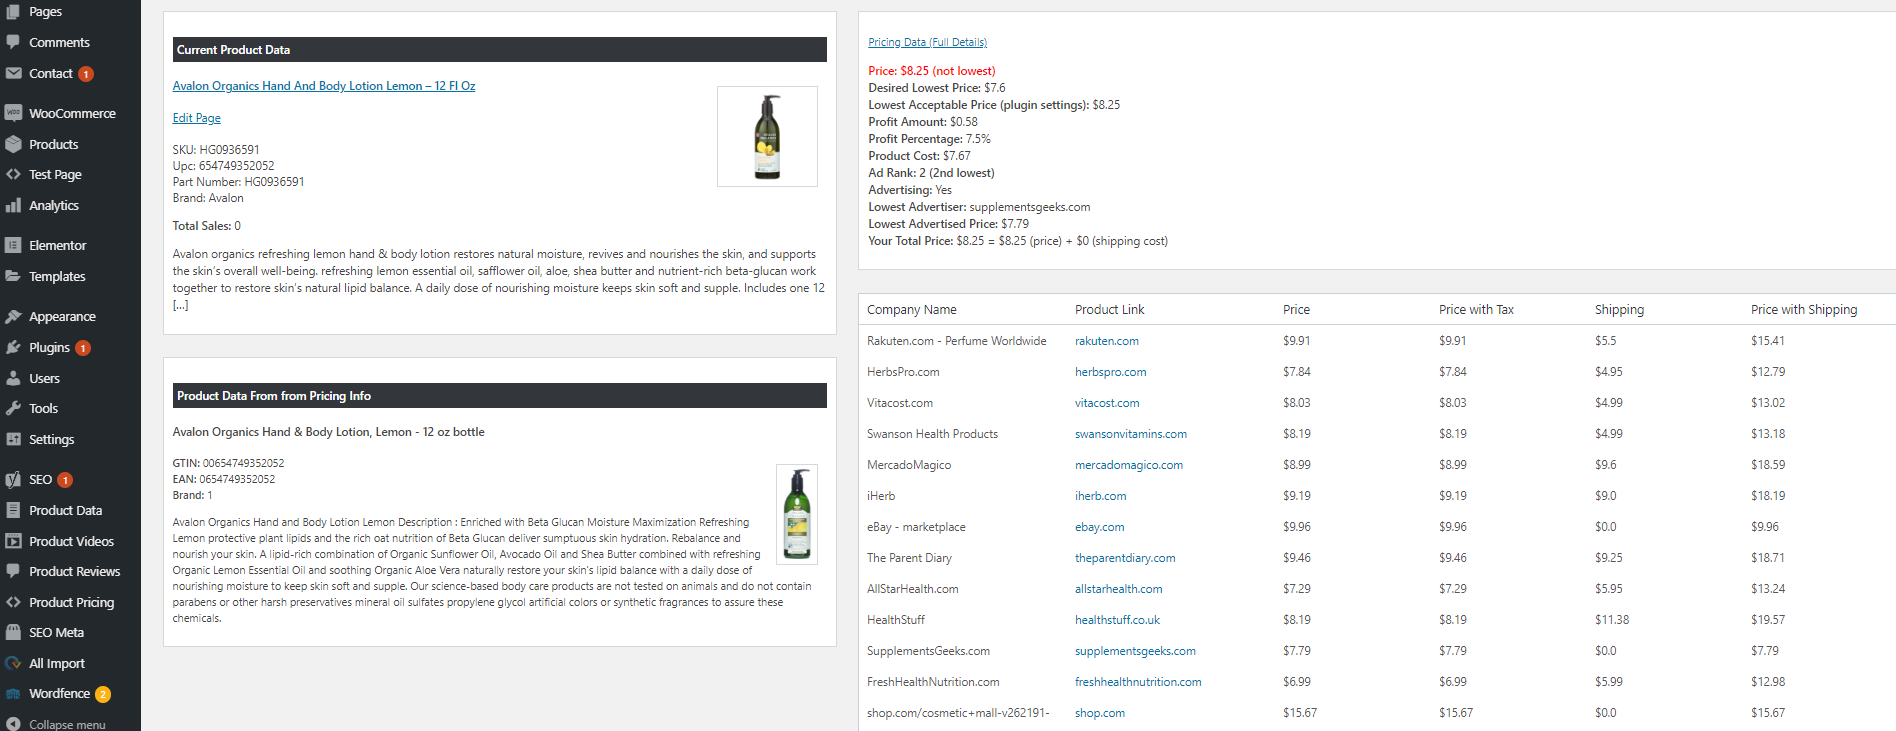 Pricing Details Page - Get a deeper insight into your competitors and their pricing.